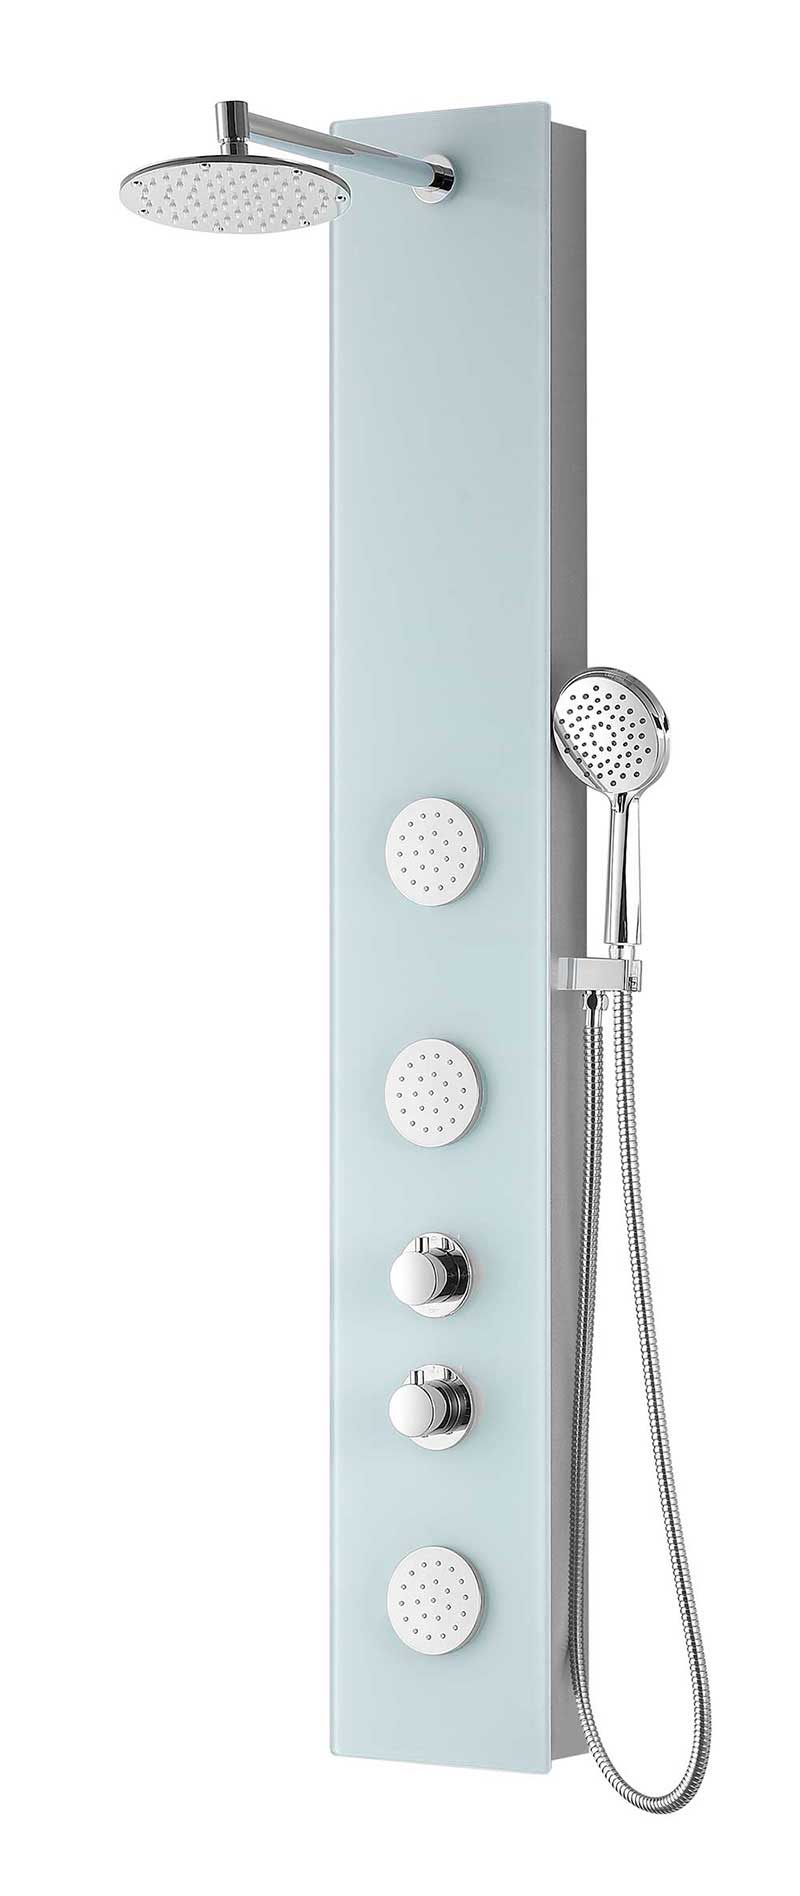 Anzzi MARE Series 60 in. Full Body Shower Panel System with Heavy Rain Shower and Spray Wand in White